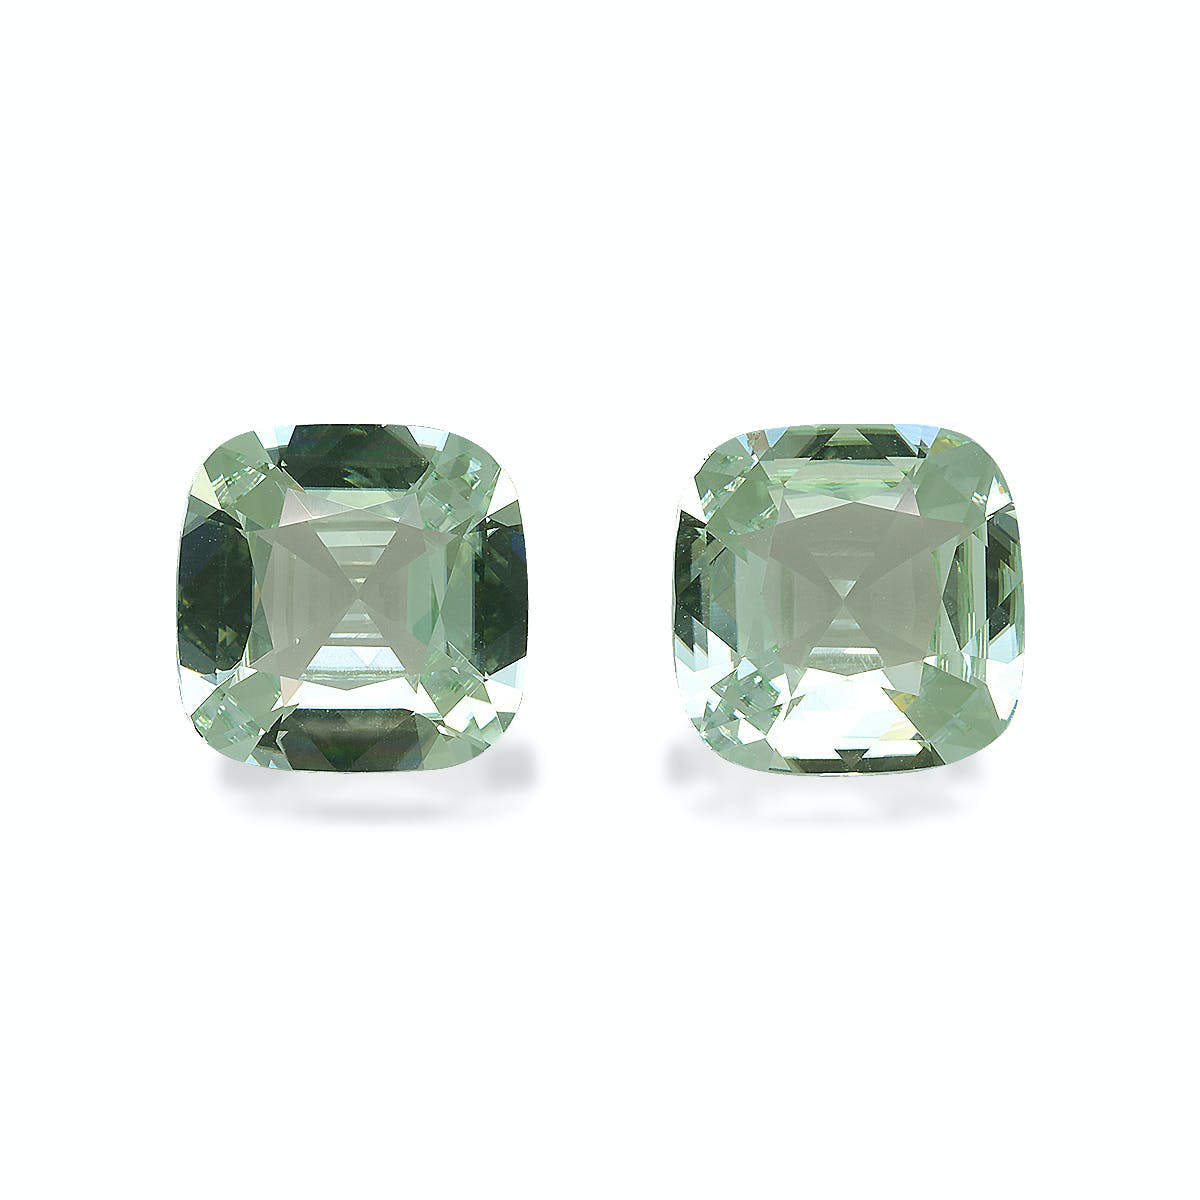 Picture of Mist Green Tourmaline 12.63ct - 12mm Pair (TG1579)